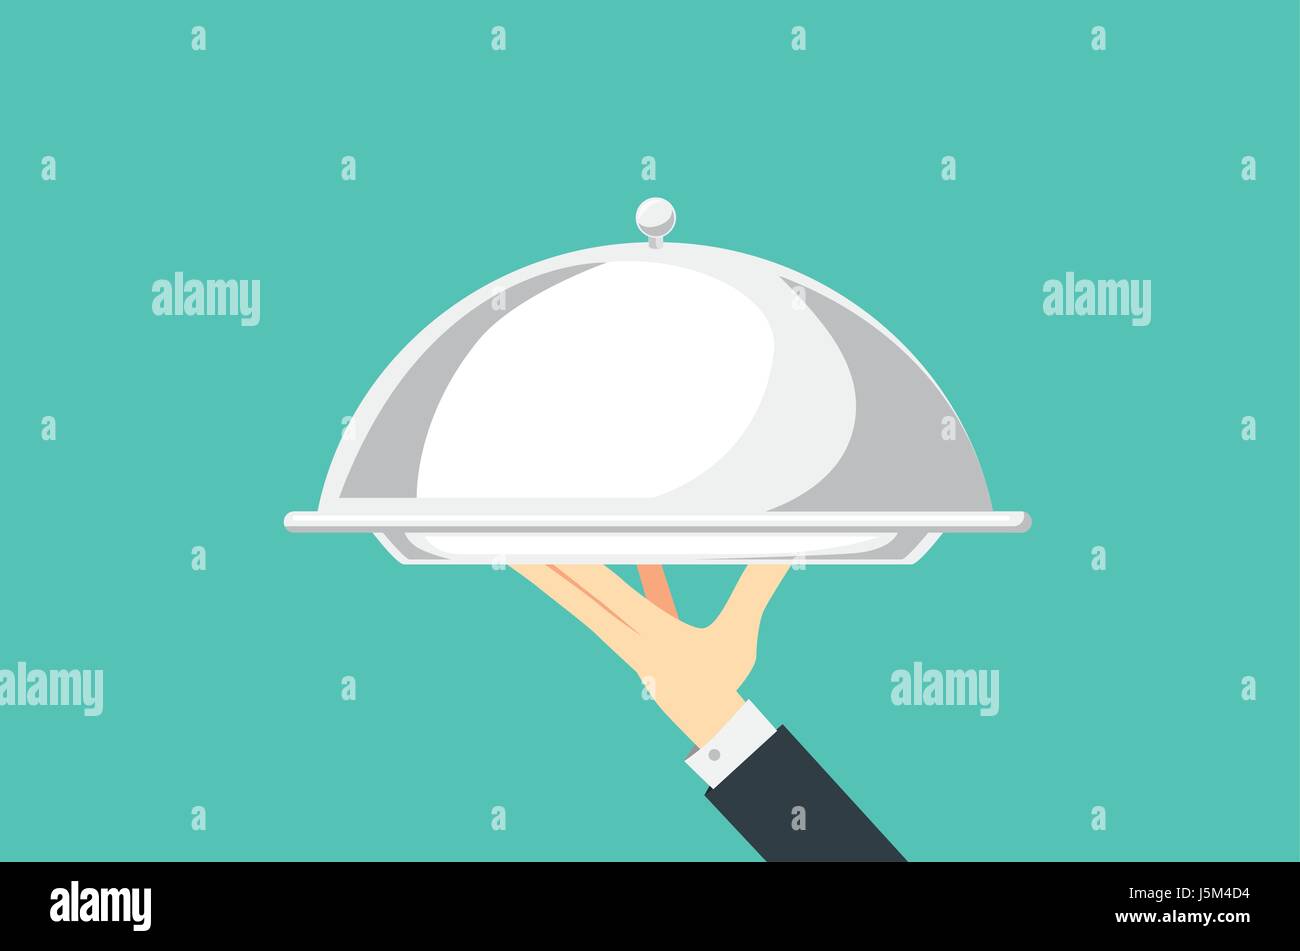 Hand of waiter holding silver tray with lid. Stock Vector